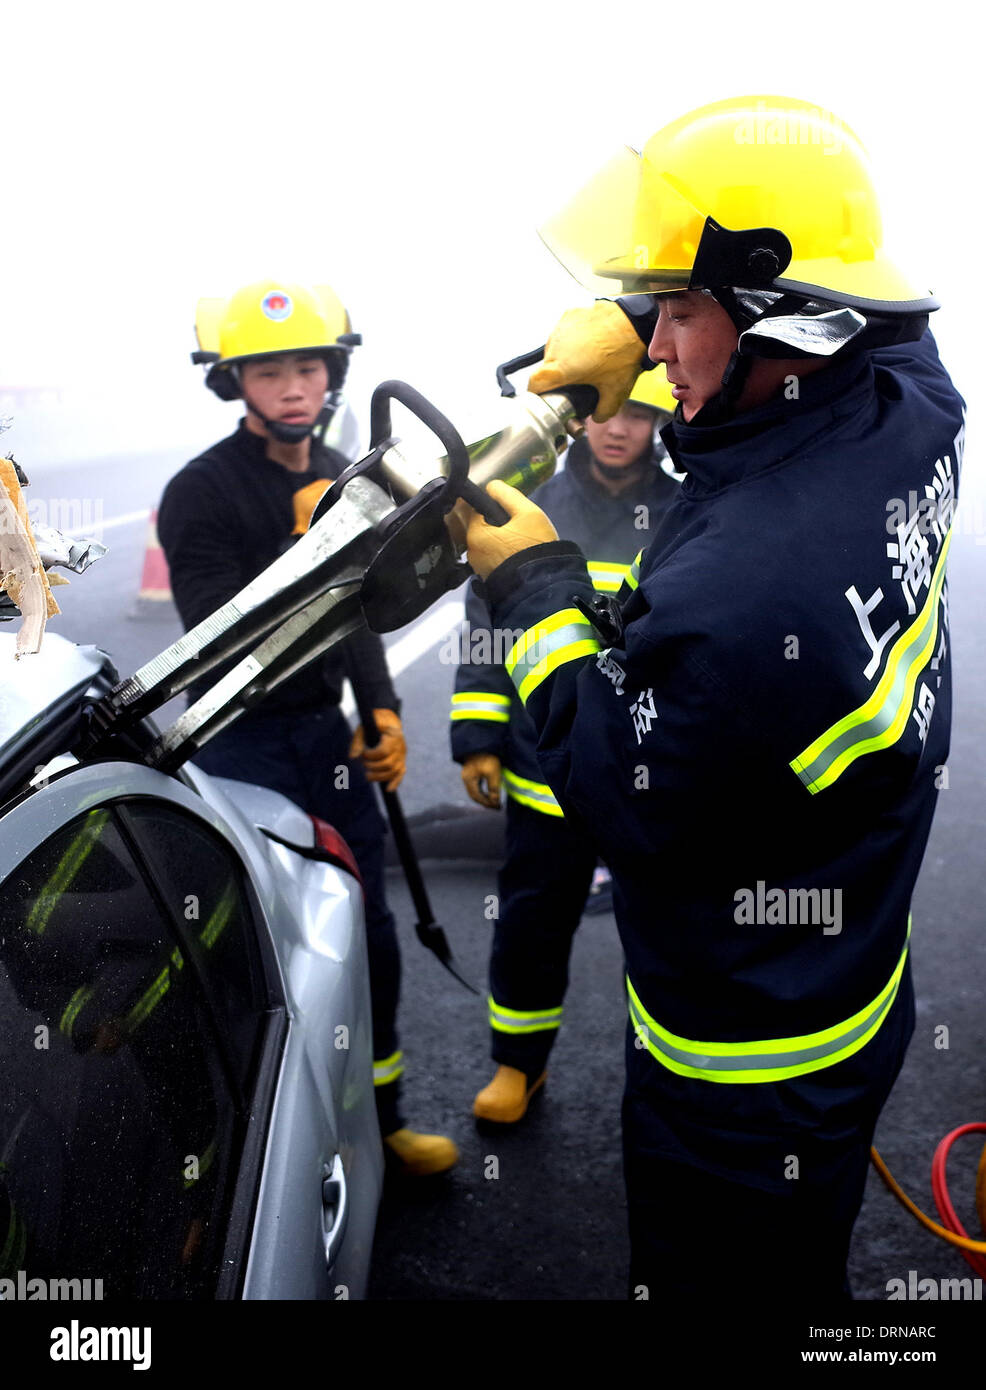 Shanghai, China. 30th January 2014. Firefighters help the trapped get out of a car after a road accident in east China's Shanghai, Jan. 30, 2014. An 11-vehicle pileup happened on the Shanghai-Kunming Expressway Thursday morning. At least three people were killed and 15 others injured, one of whom critically, according to police. Credit:  Xinhua/Alamy Live News Stock Photo